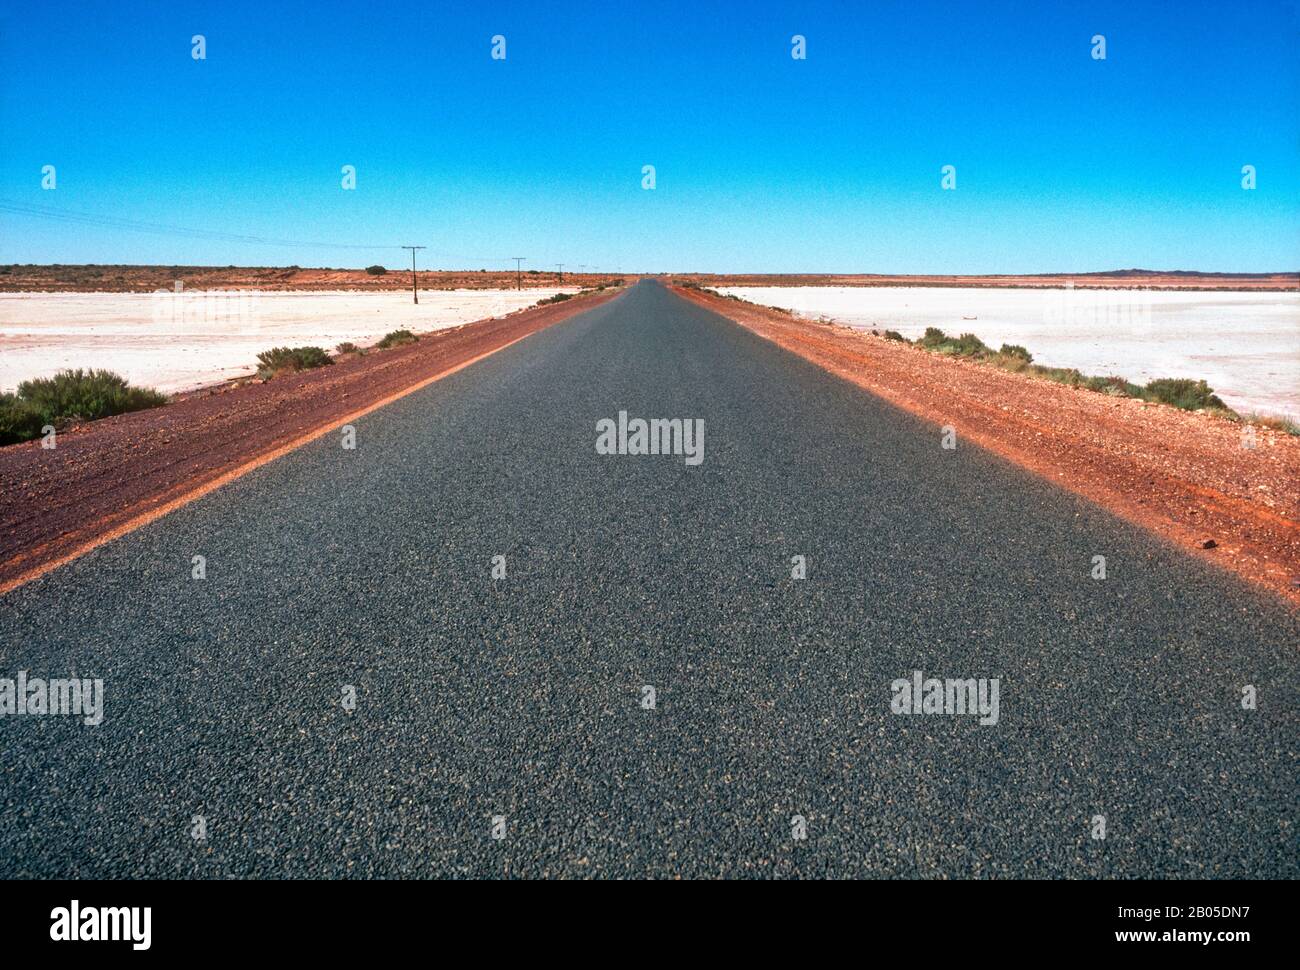 Wide open road, bitumen road running up through Salt Lake country, outback, Central Australia Stock Photo